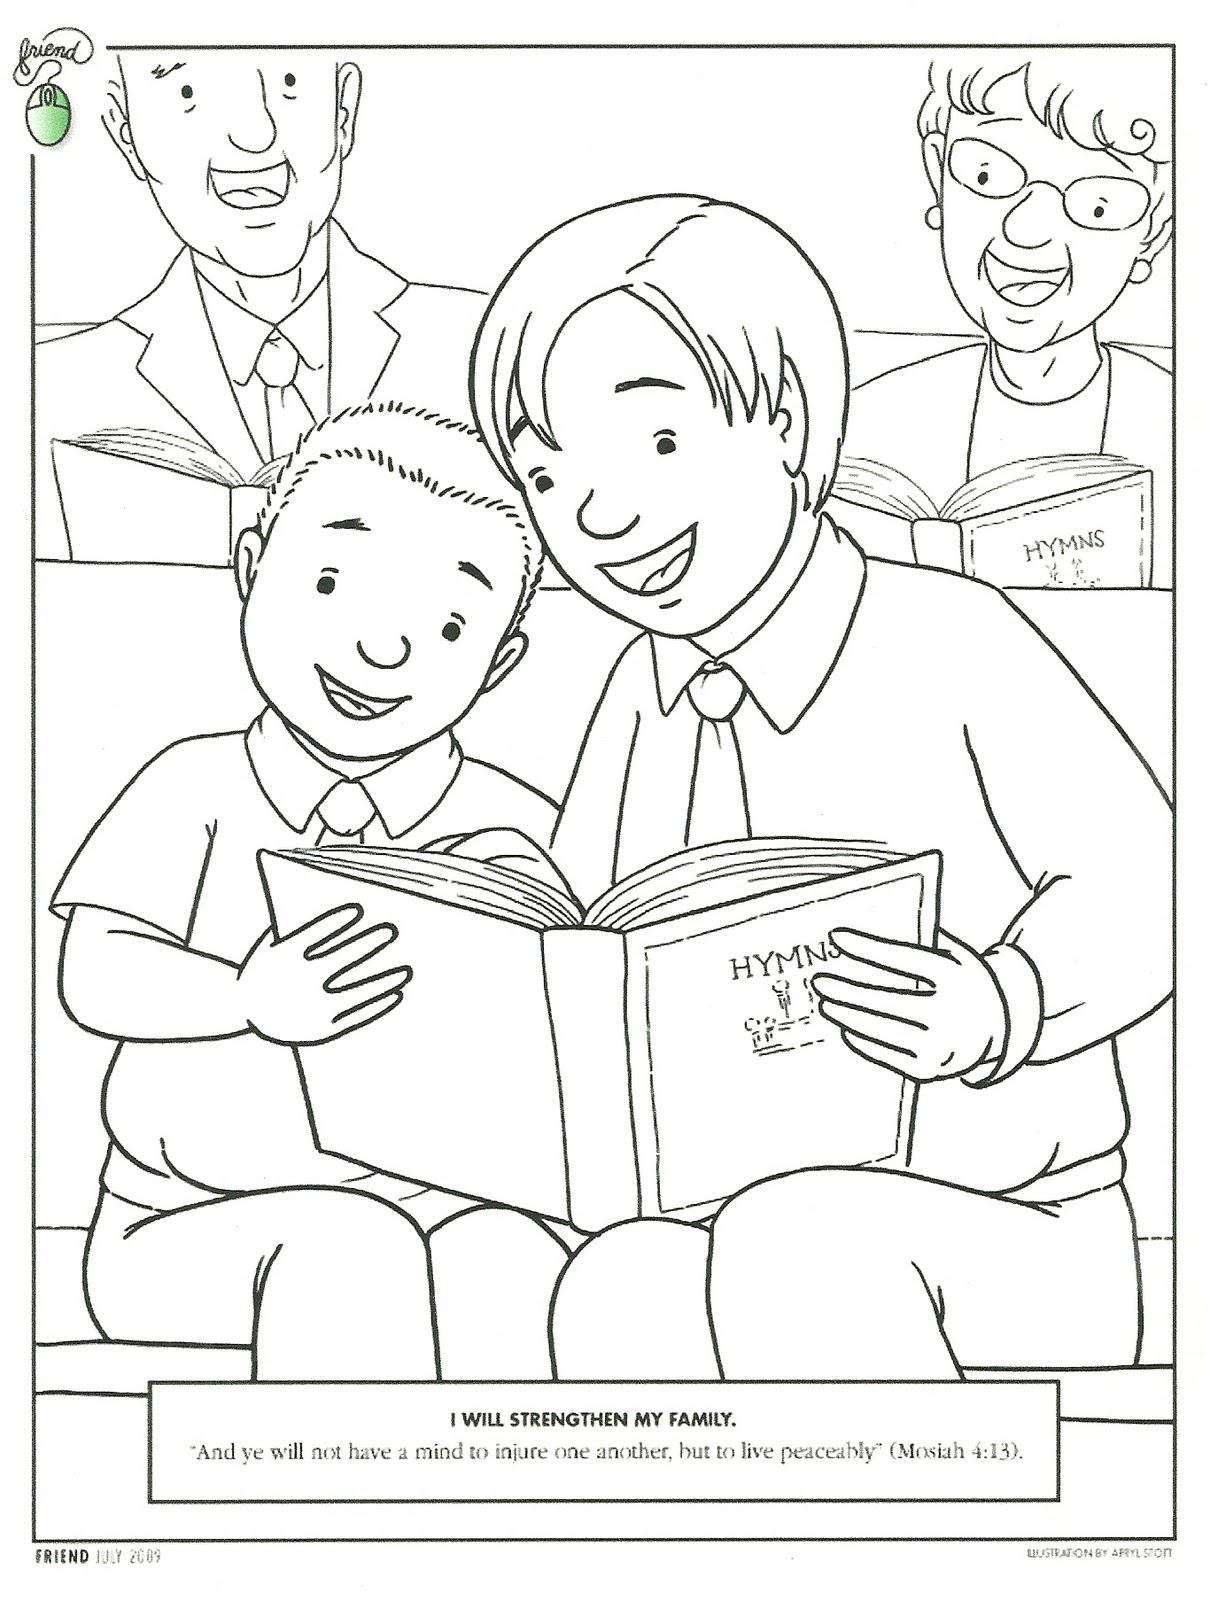 sabbath day coloring pages and activities - photo #11